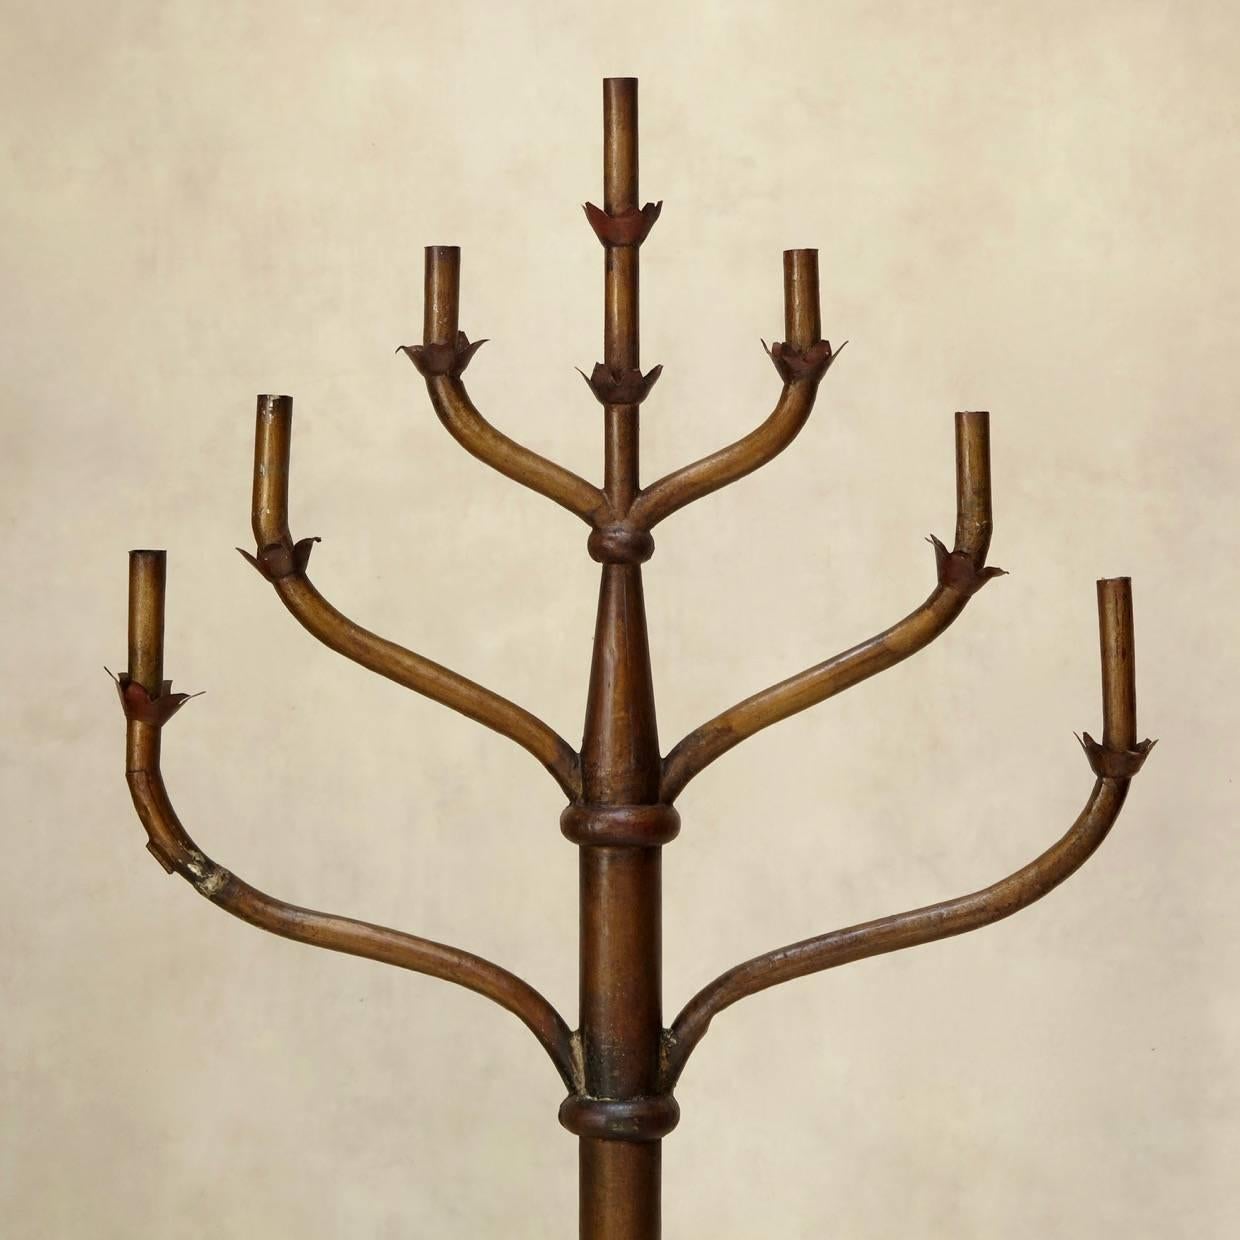 Tall, freestanding menorah-style candelabra. The lower section is carved from wood and the top is tin. Antique, burnished gold paint color.